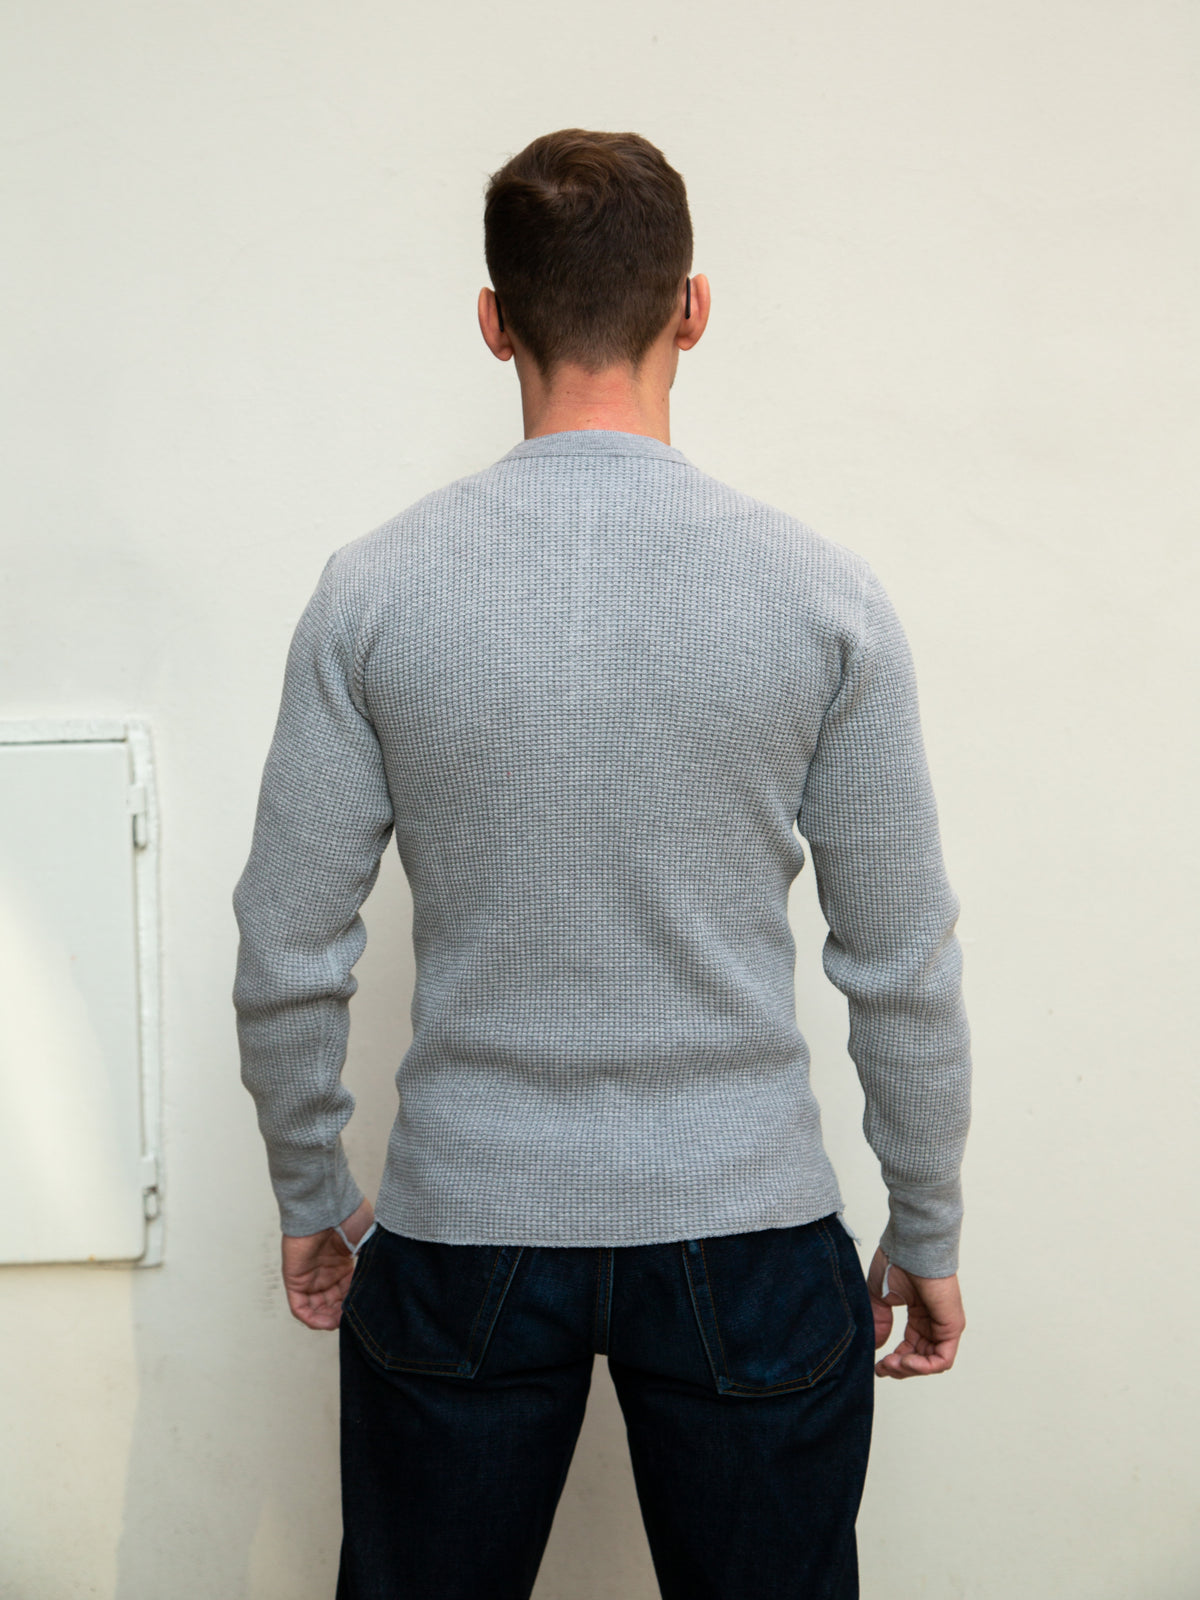 Iron Heart / Waffle Knit Long Sleeved Thermal Henley - Grey (IHTL-1213-GRY)